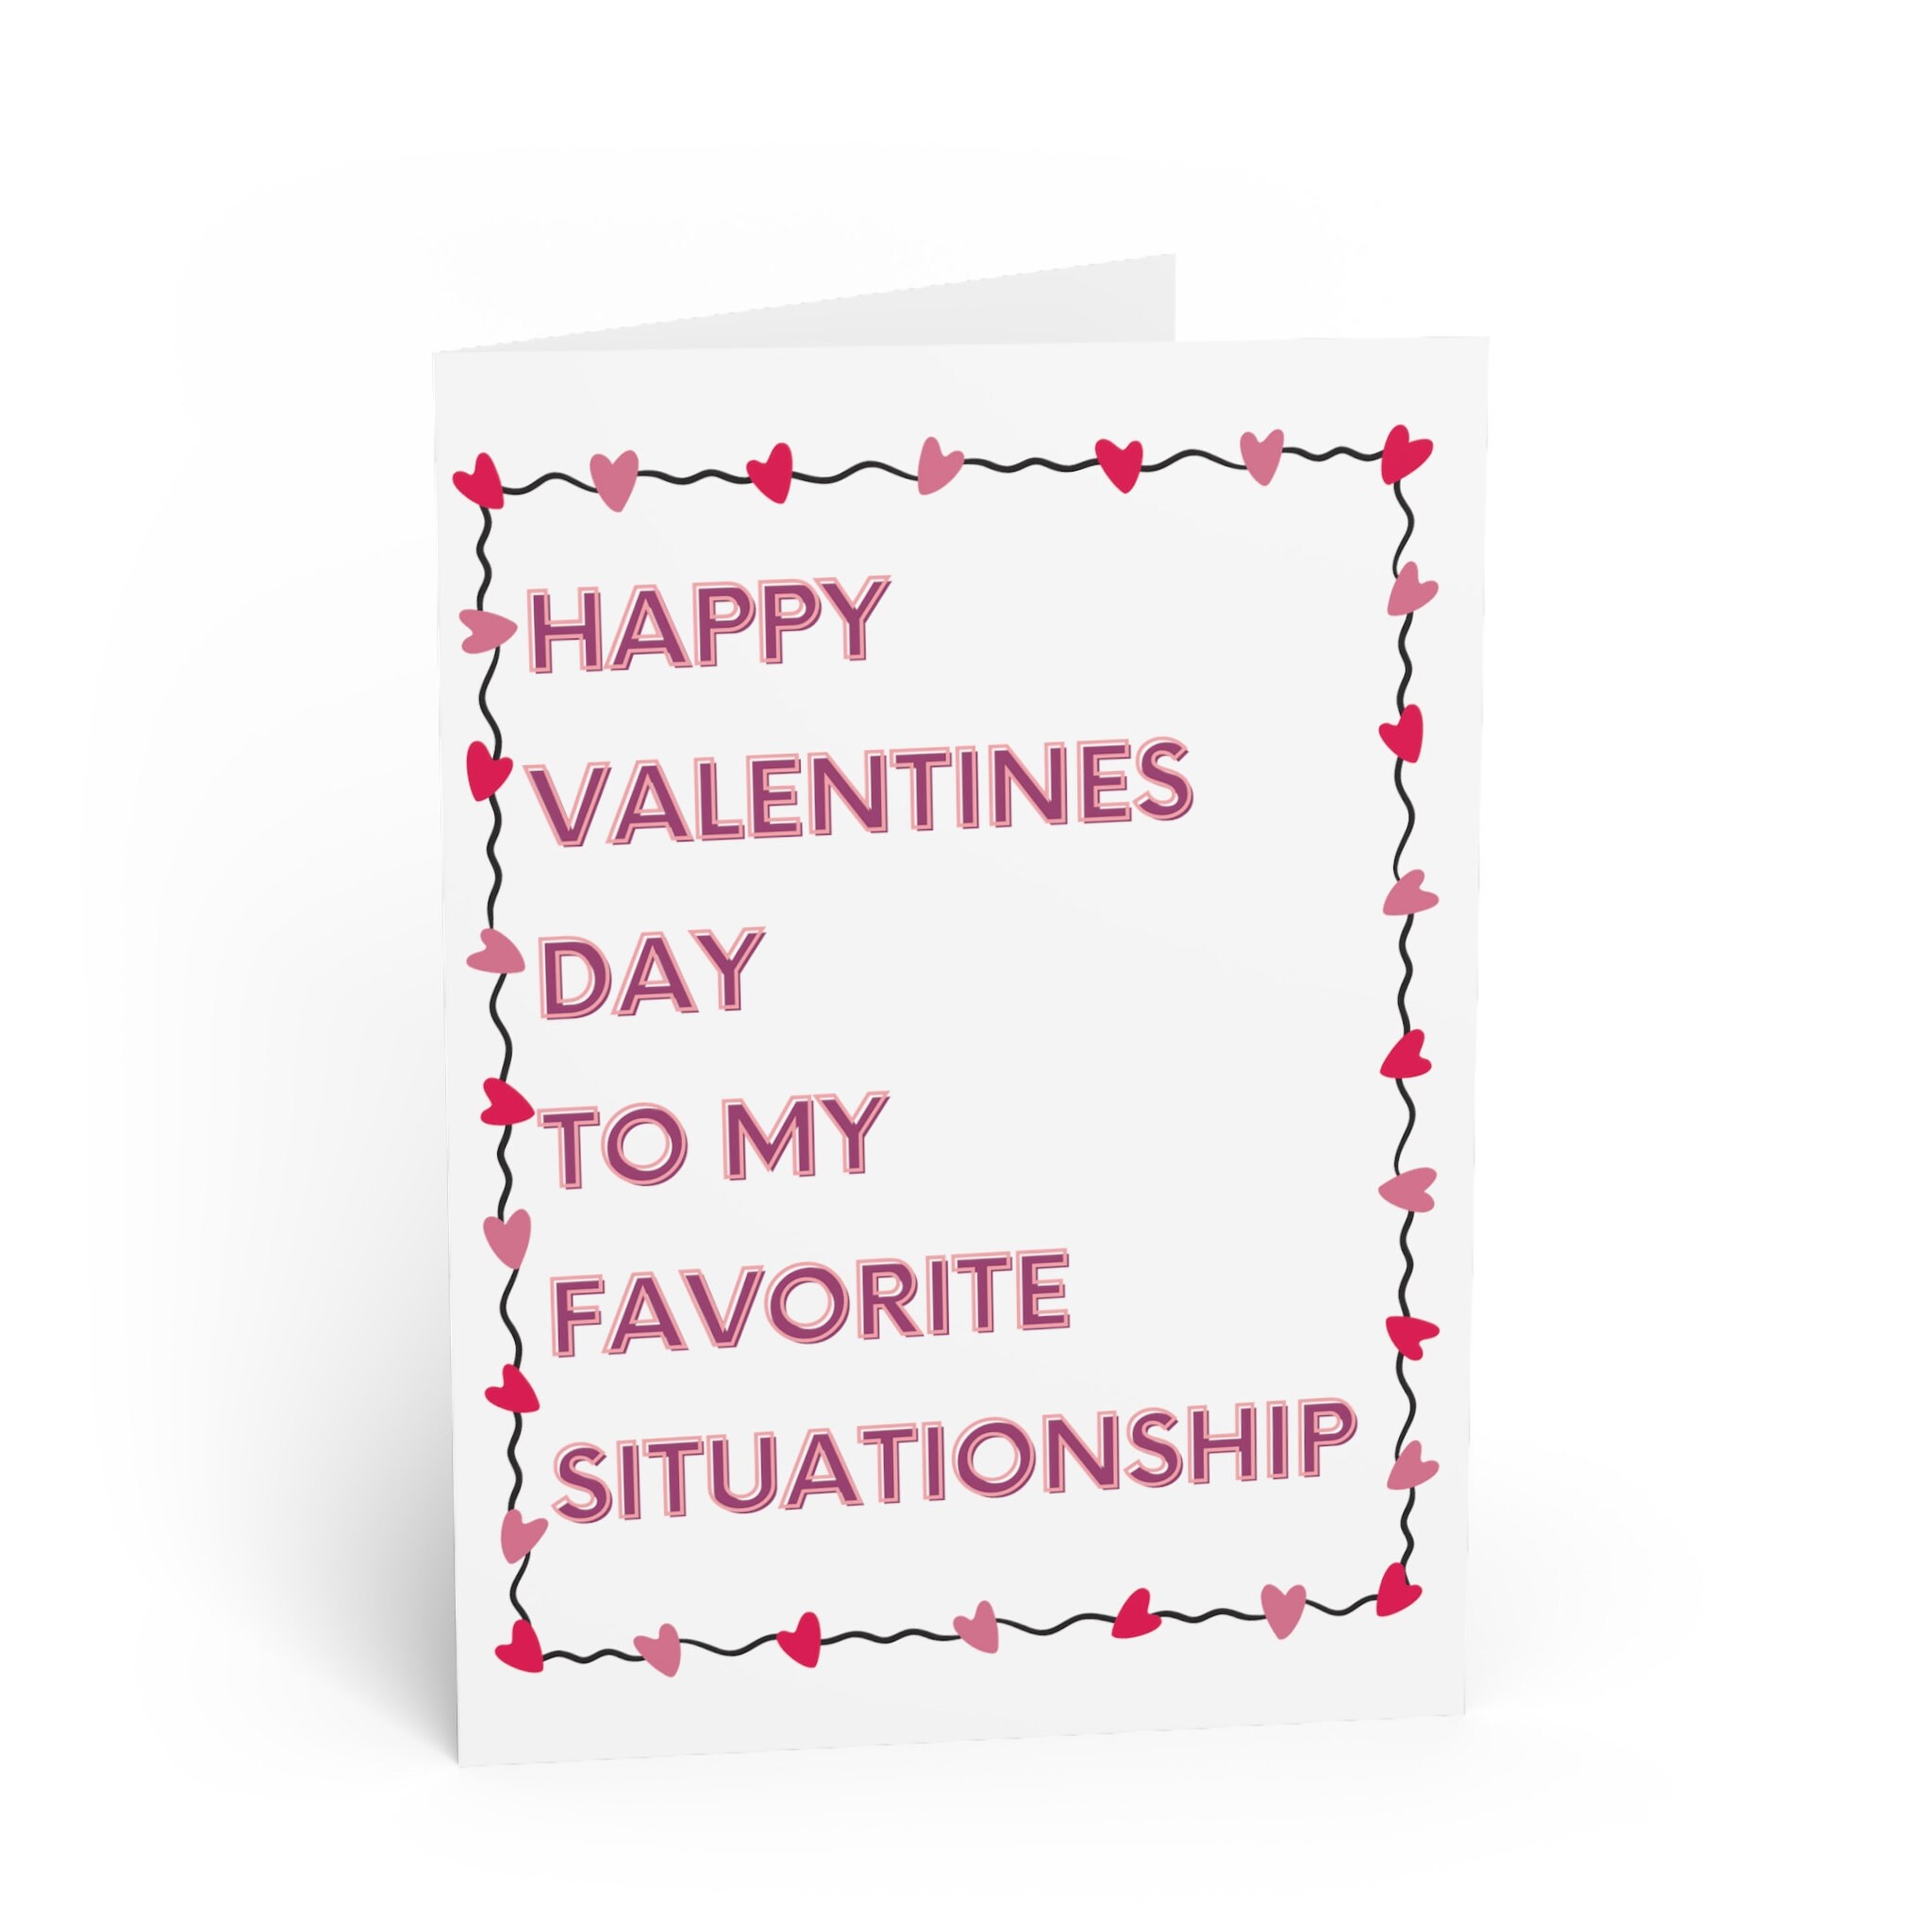 Happy Valentines Day to My Favorite Situationship Card 